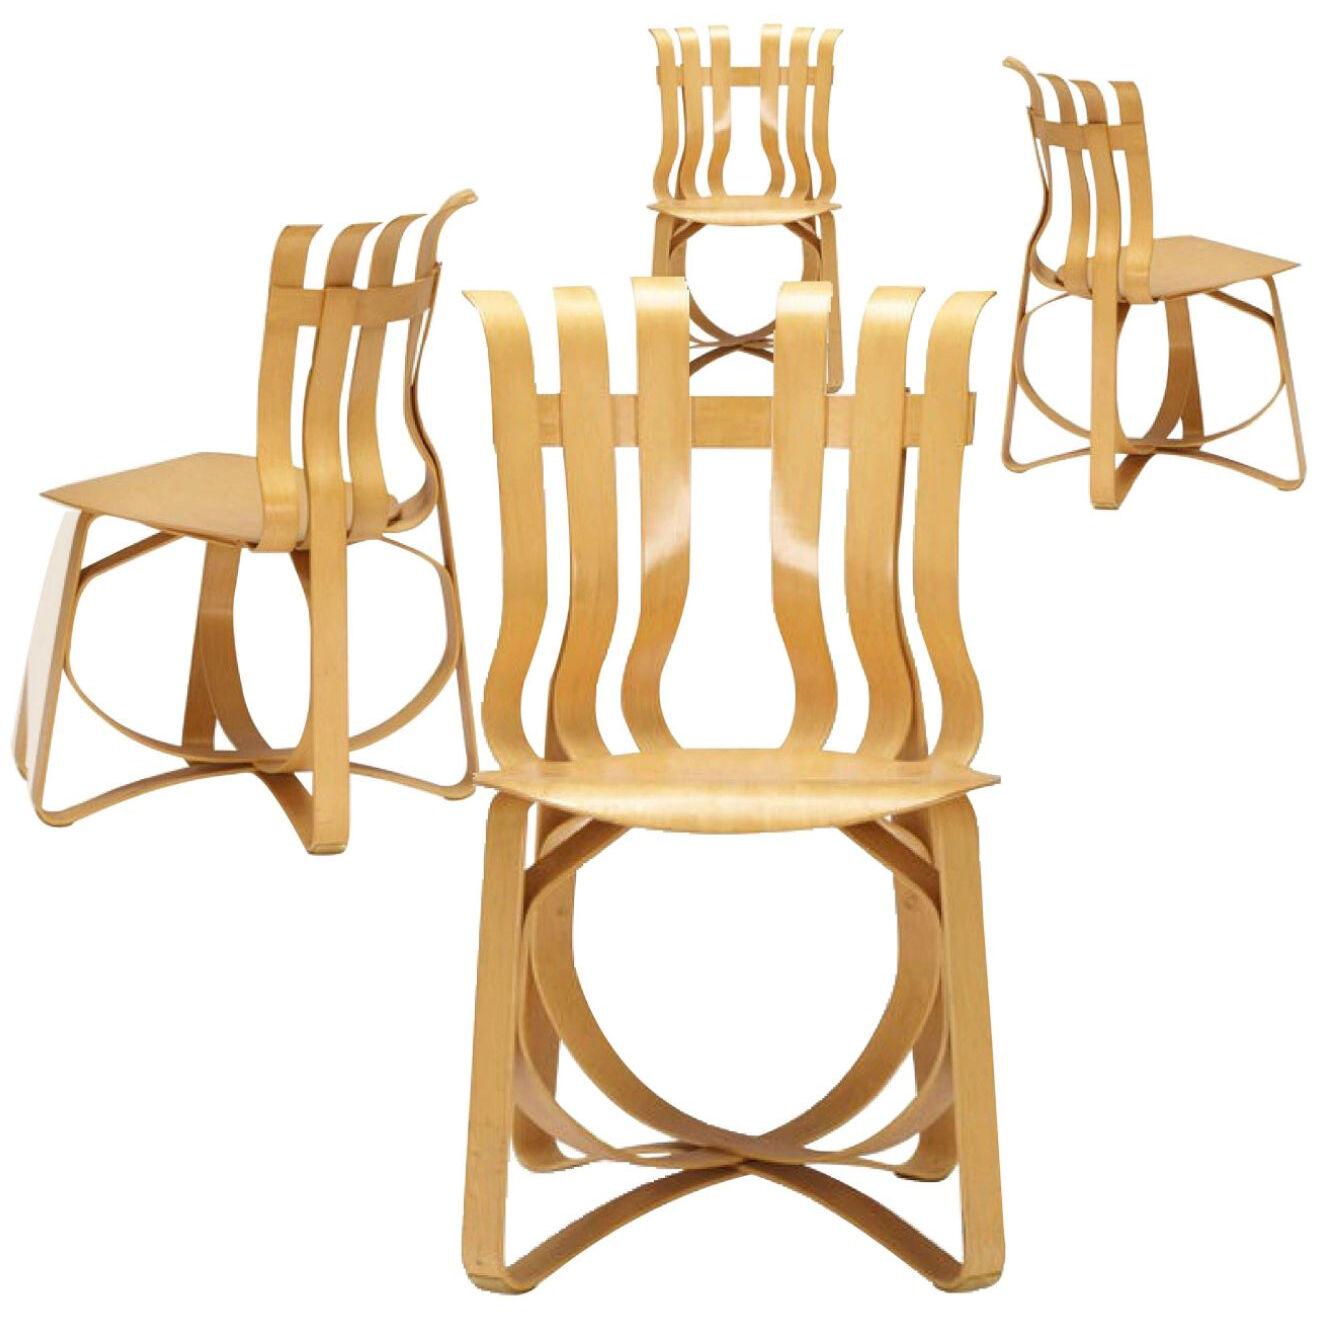 Frank Gehry for Knoll Hat Trick Chair, Set of 4, 1990